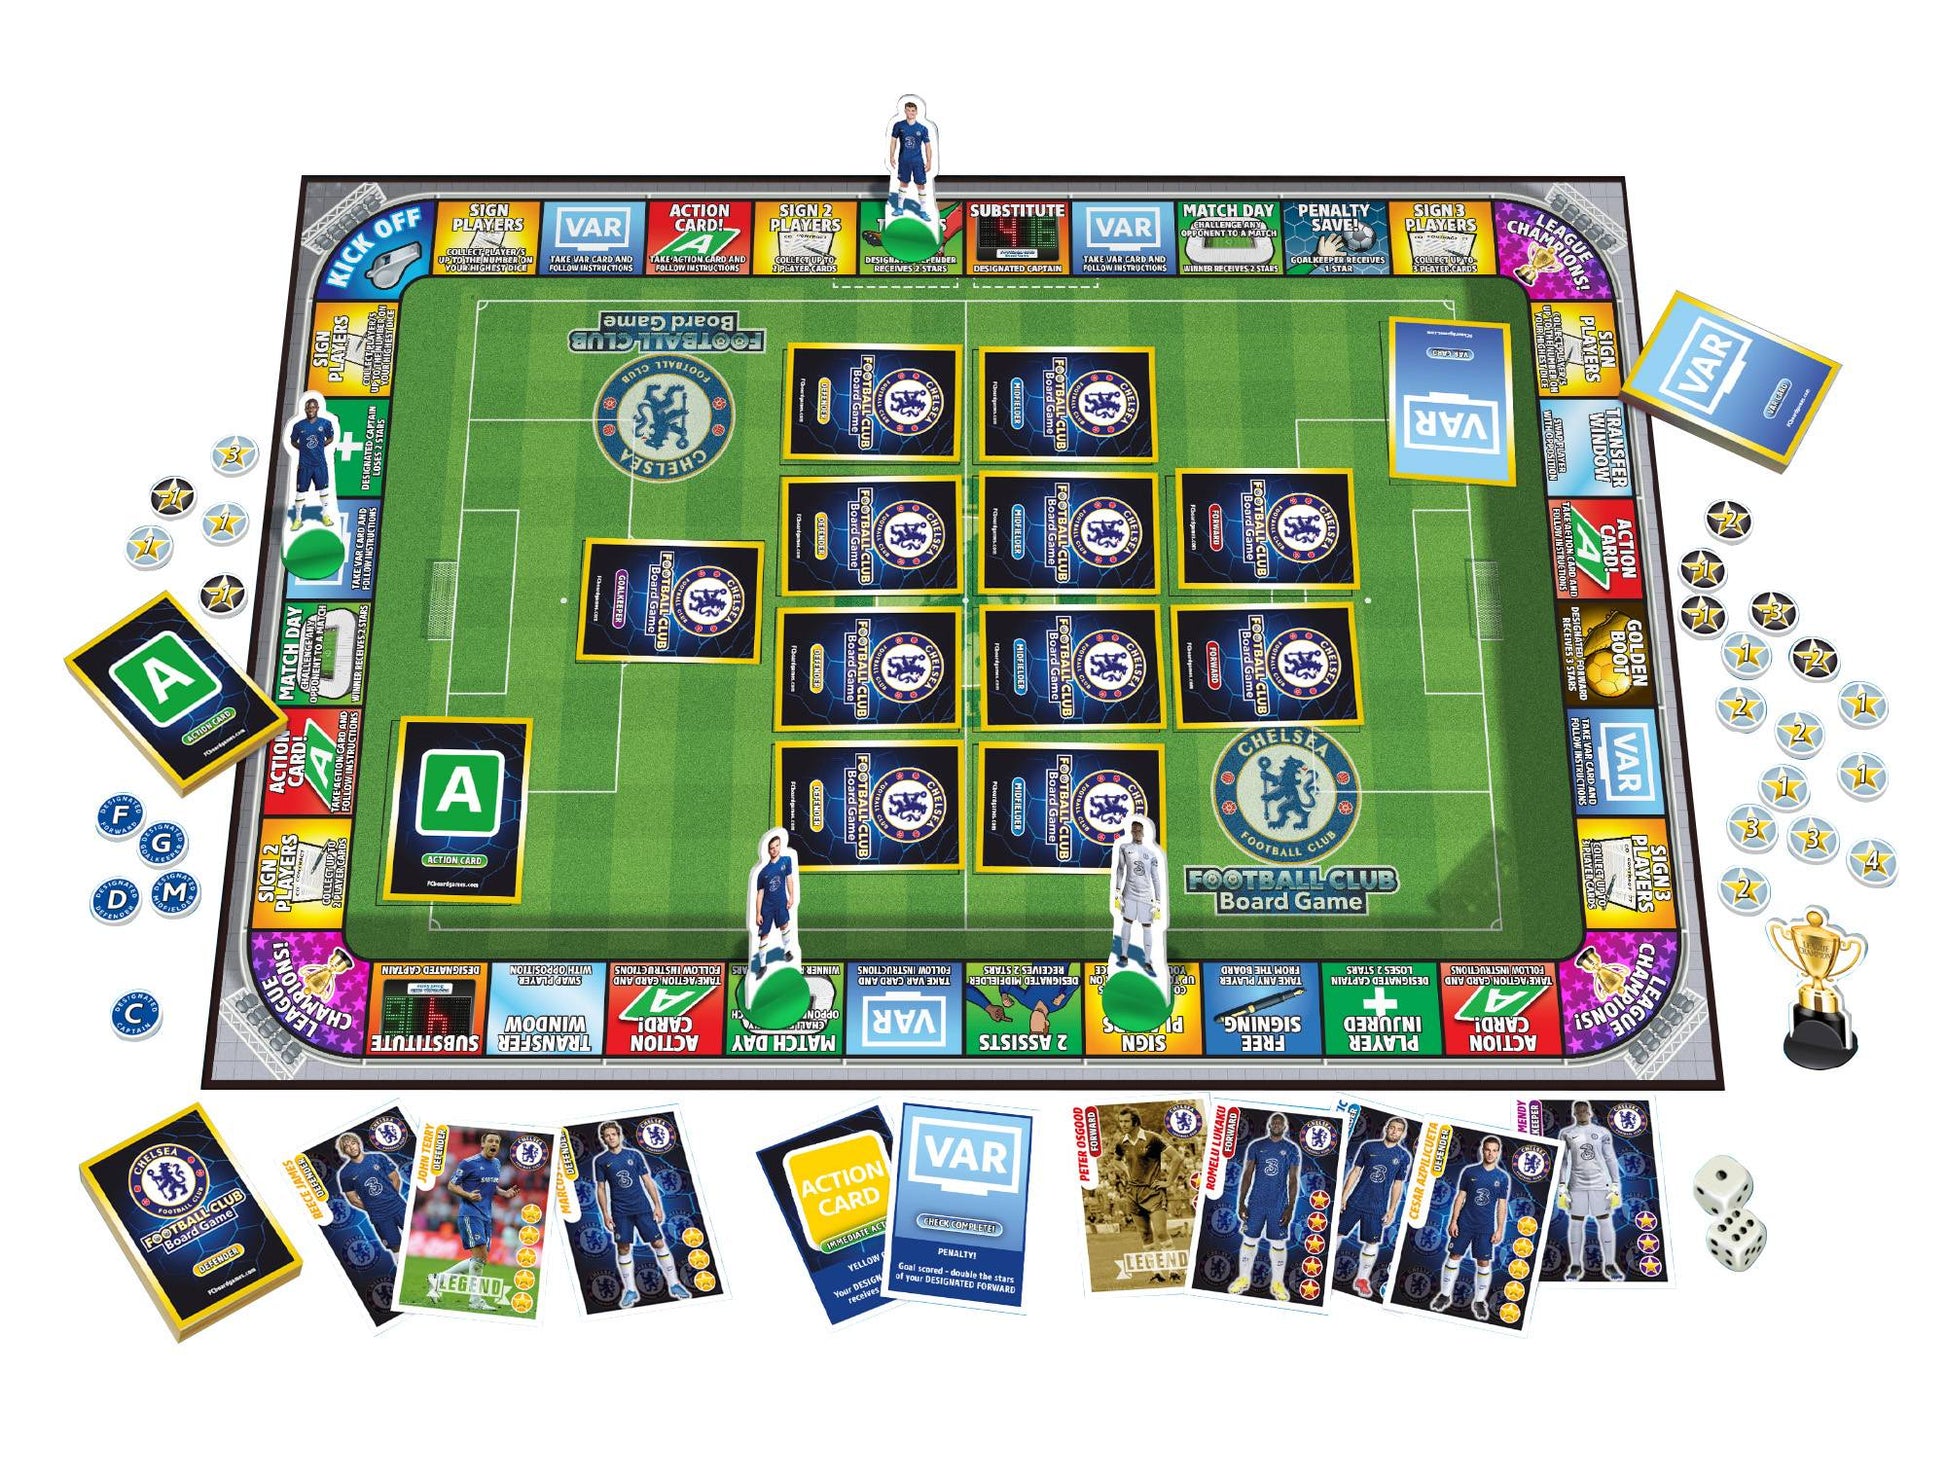 Shop Winning Moves Monopoly Chelsea Football Club Edition Online in Qatar